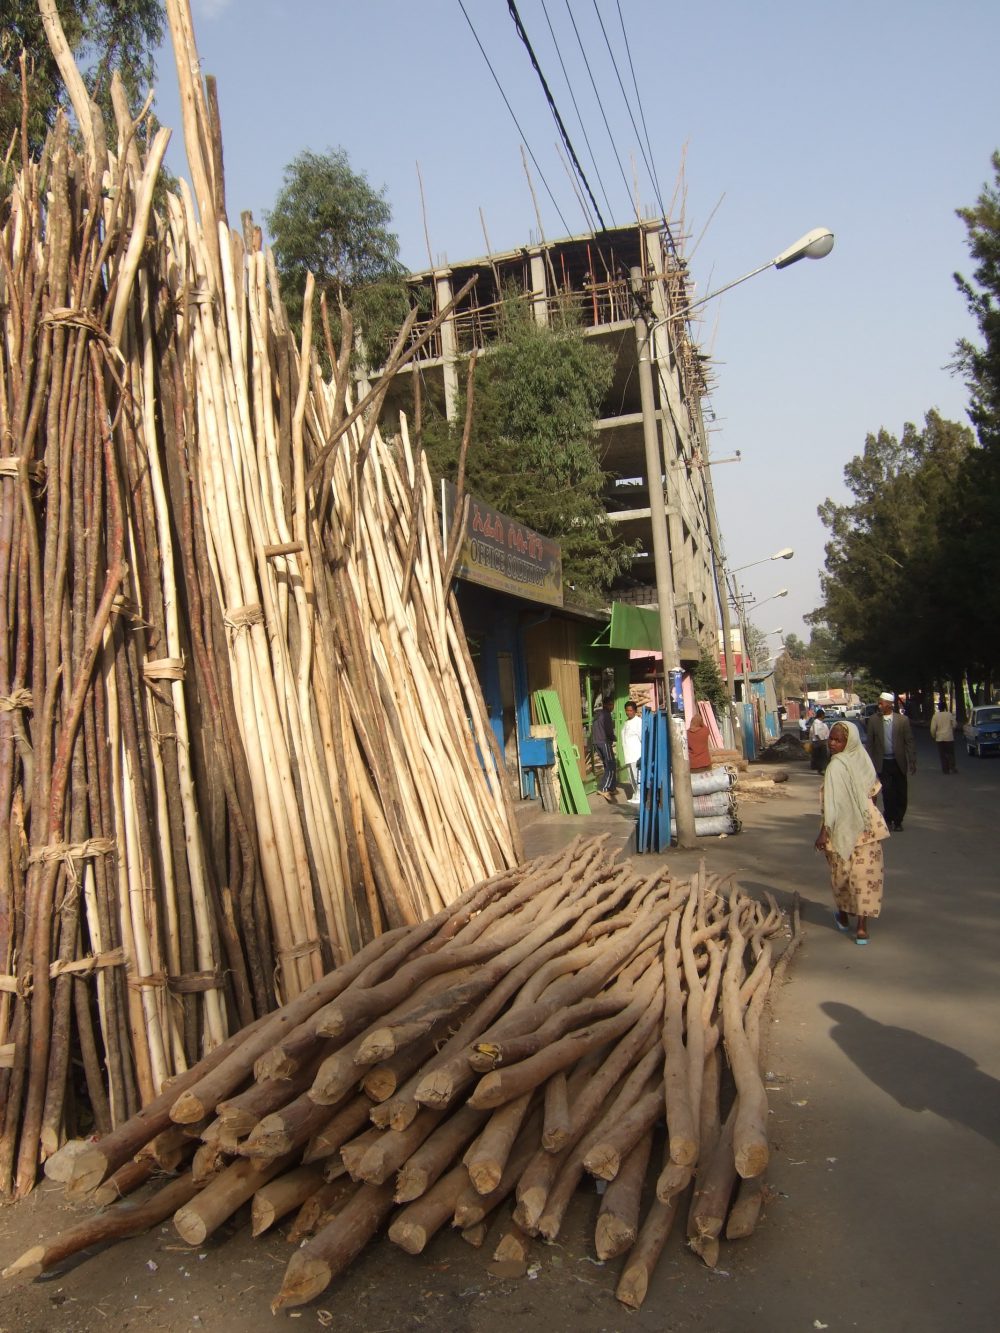 25/26. February: 12&12 – 24 Hours of Addis Ababa by Jeroen Visser, 10 P.M. – 2 A.M.